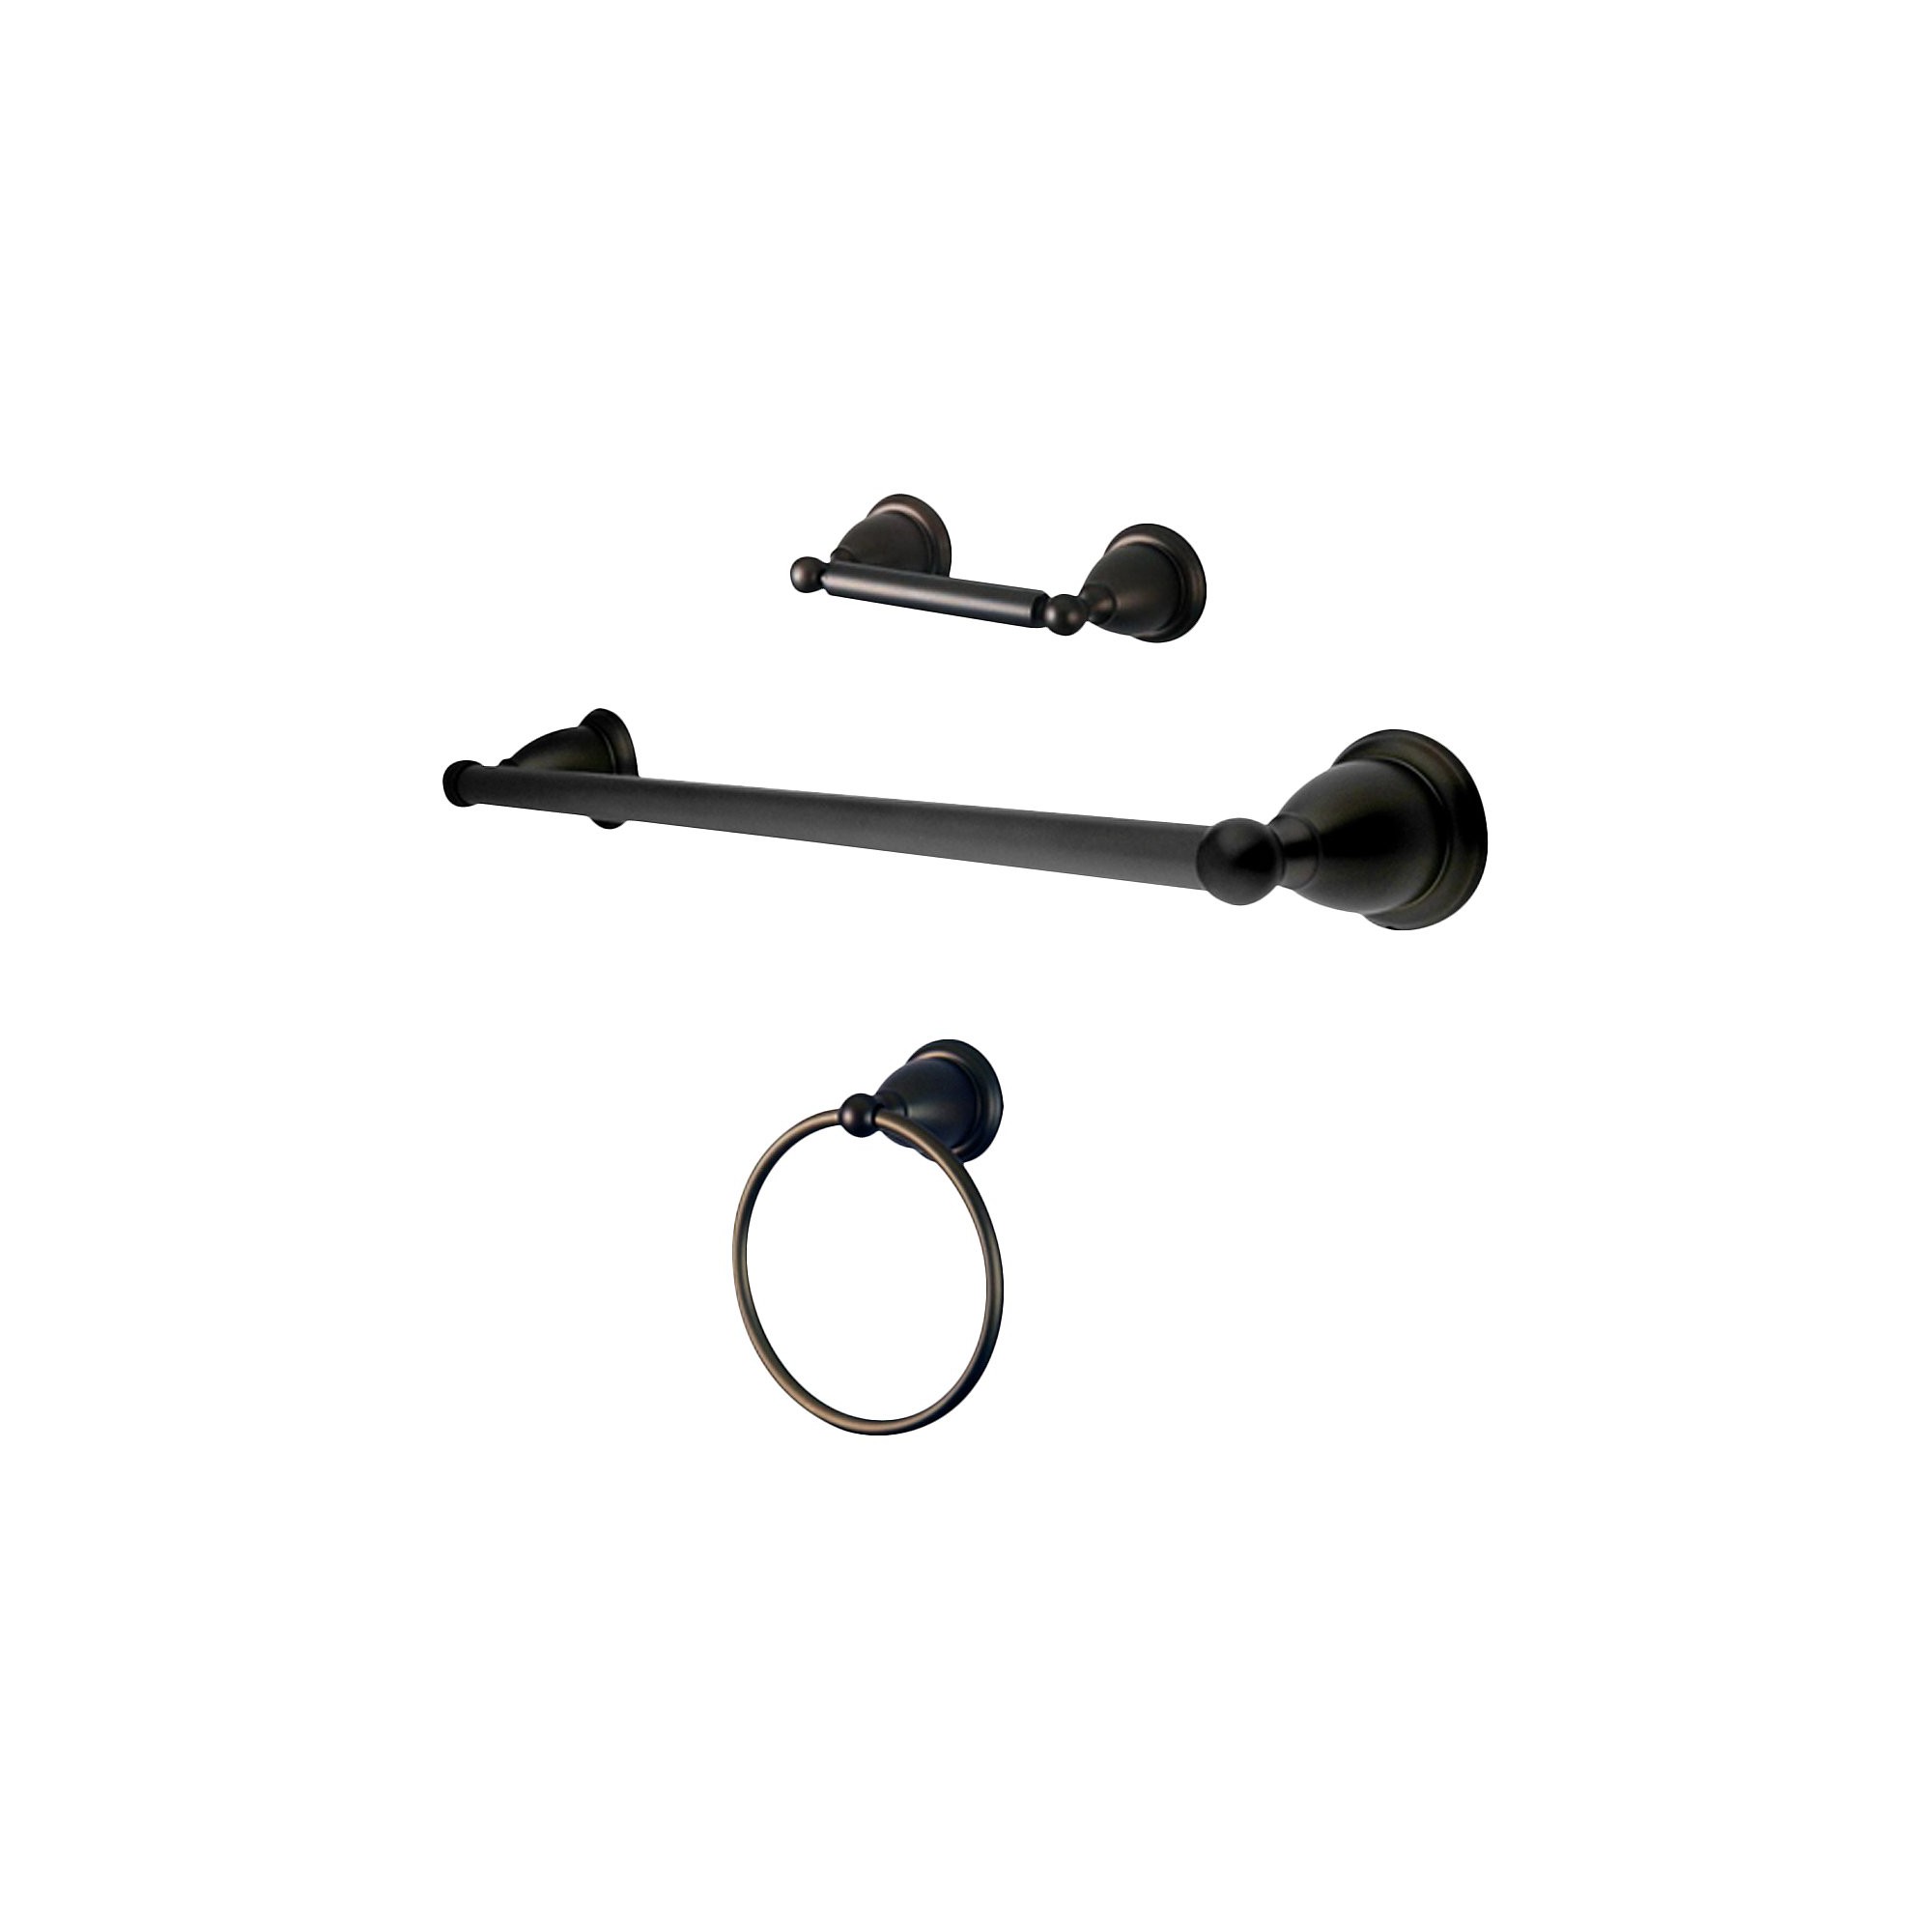 Traditional Solid Brass Oil Rubbed Bronze 3-piece Towel Bar Bath Accessory Set - Kingston Brass